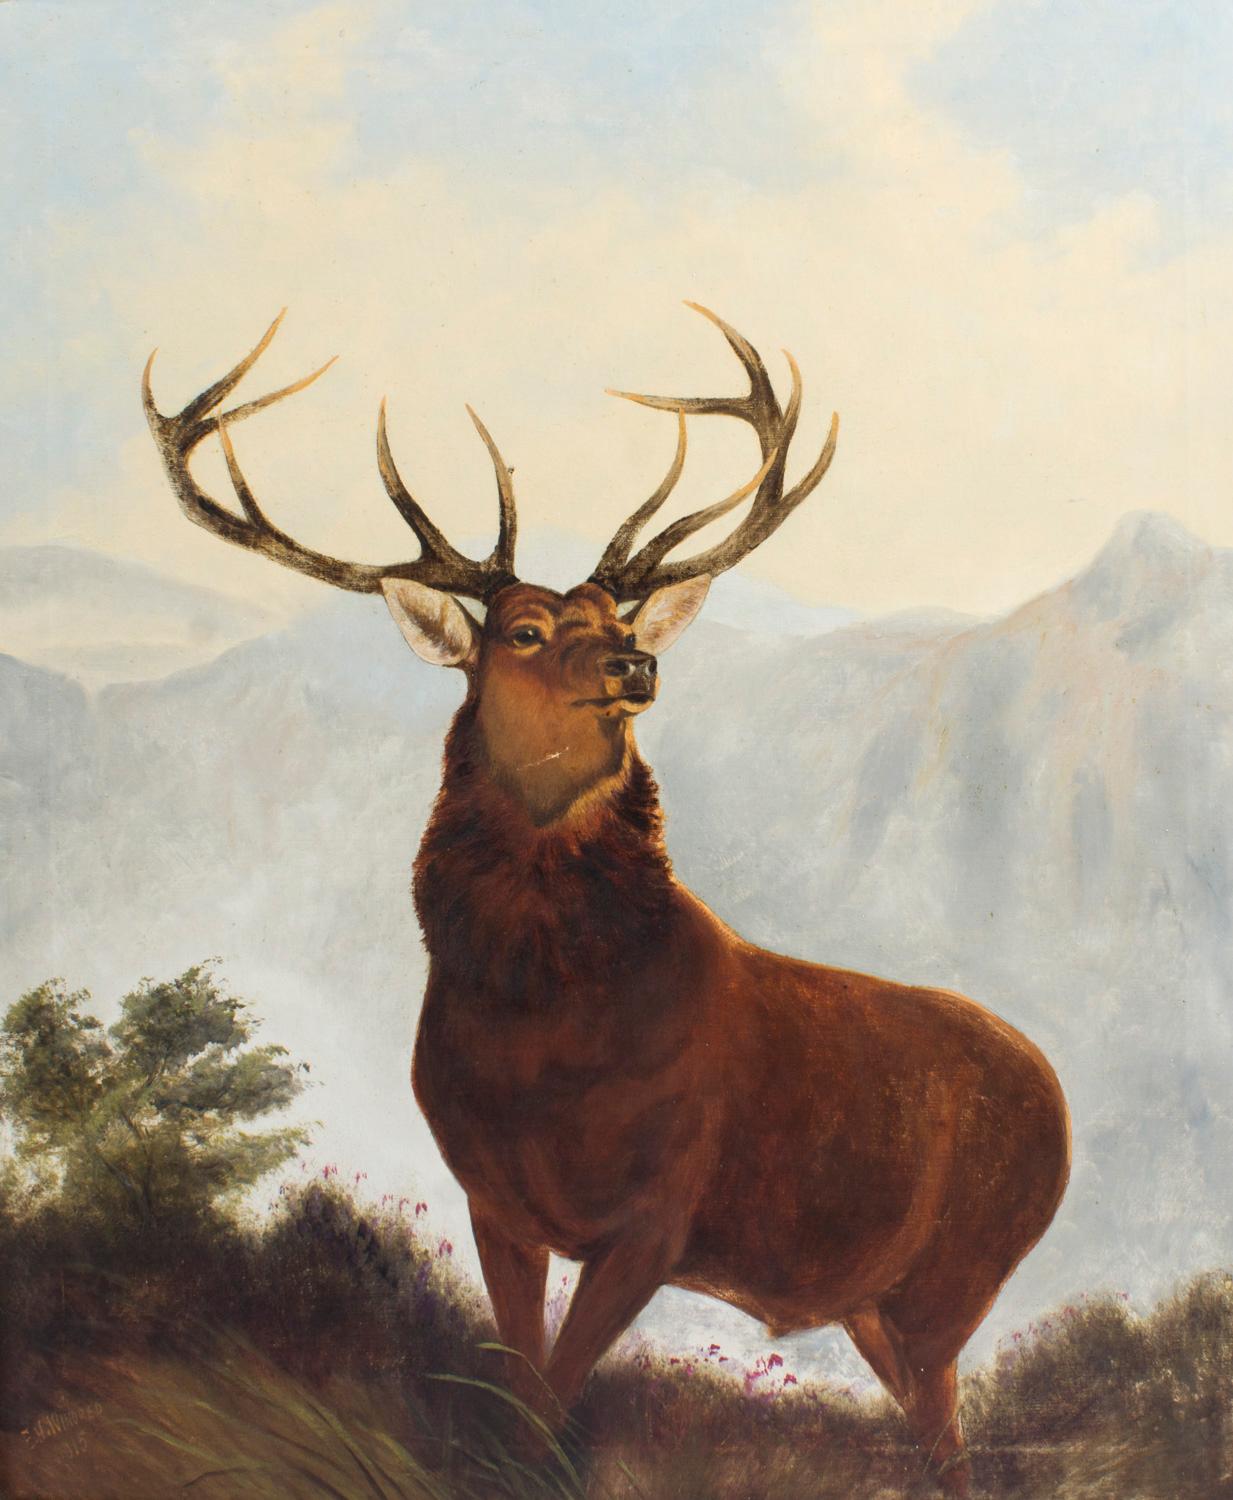 This is a beautiful large antique oil on canvas painting of a stag by Edward Henry Windred (1875-1953), signed and dated 1915, lower left.

The painting features a large red deer at the top of a steep ridge in the Highlands of Scotland.

The